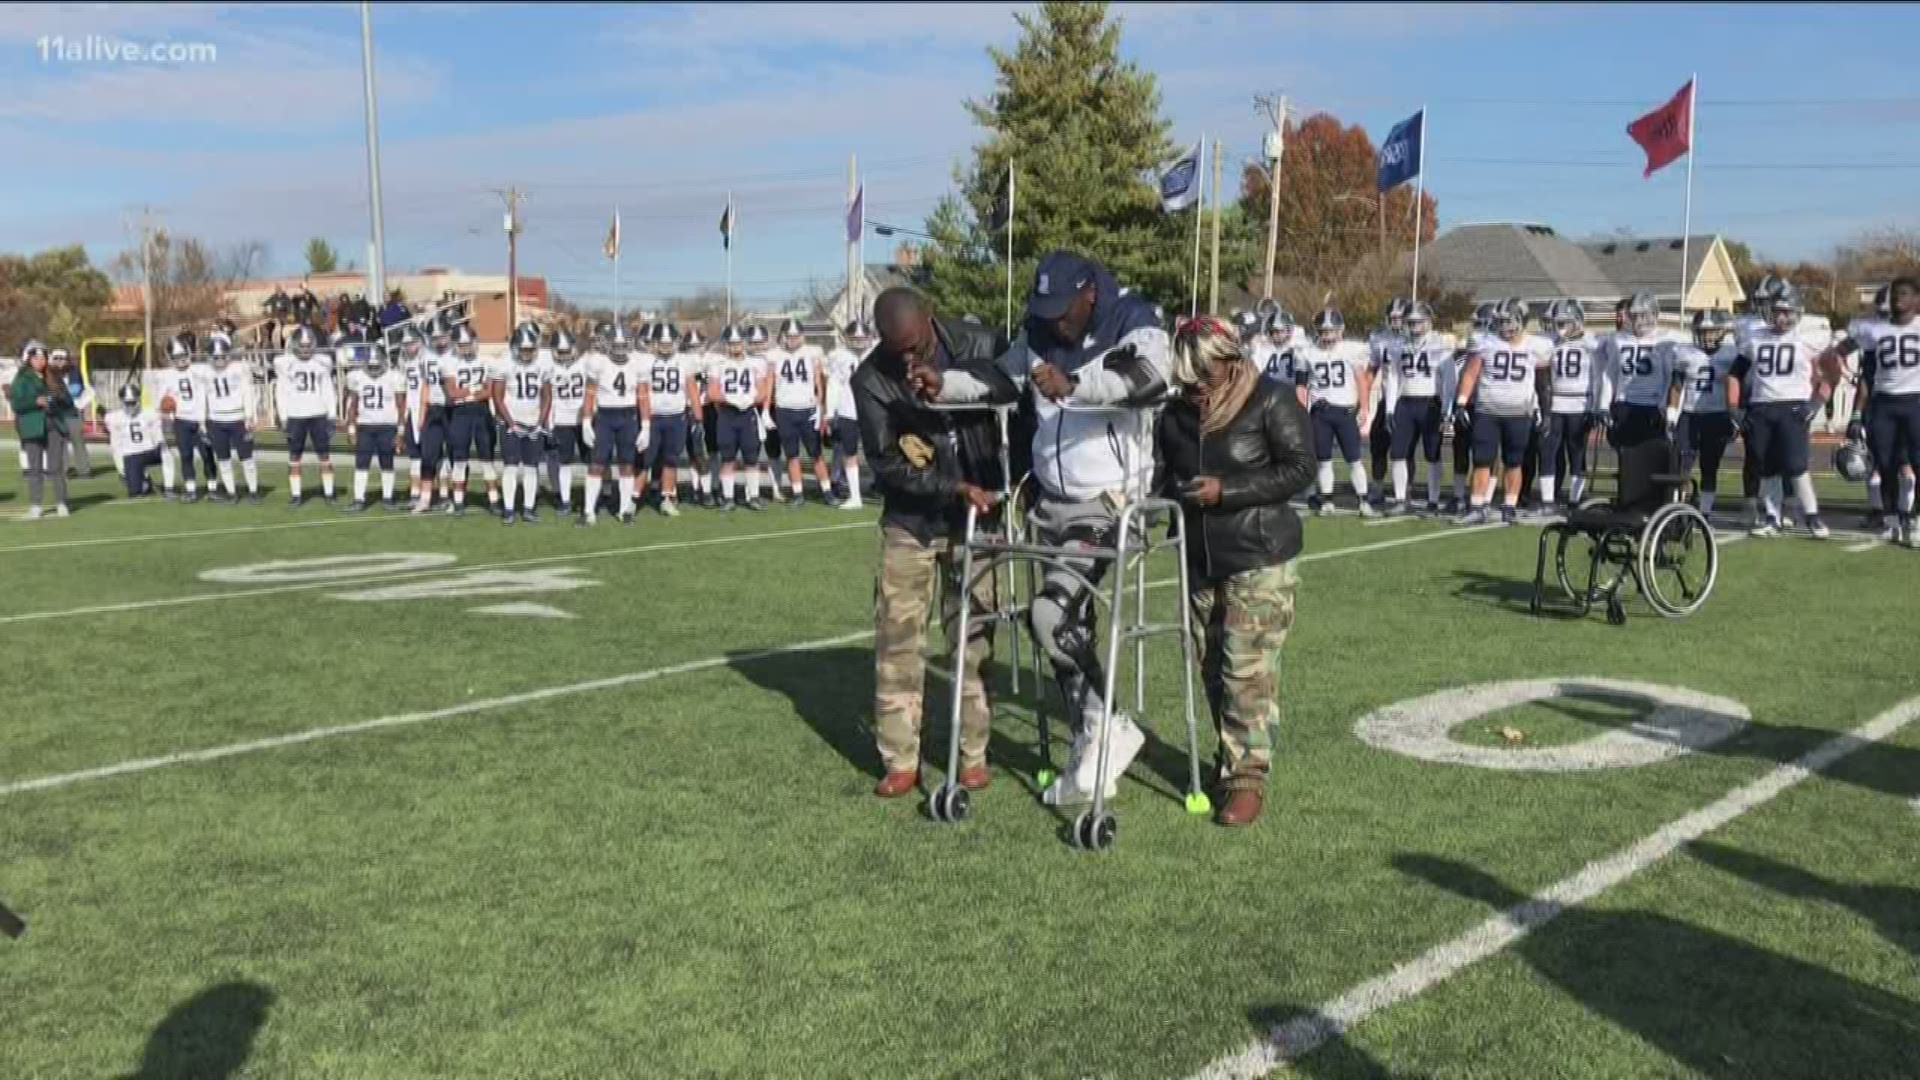 The Berry College player was told 14 months ago he would likely never be able to walk again.